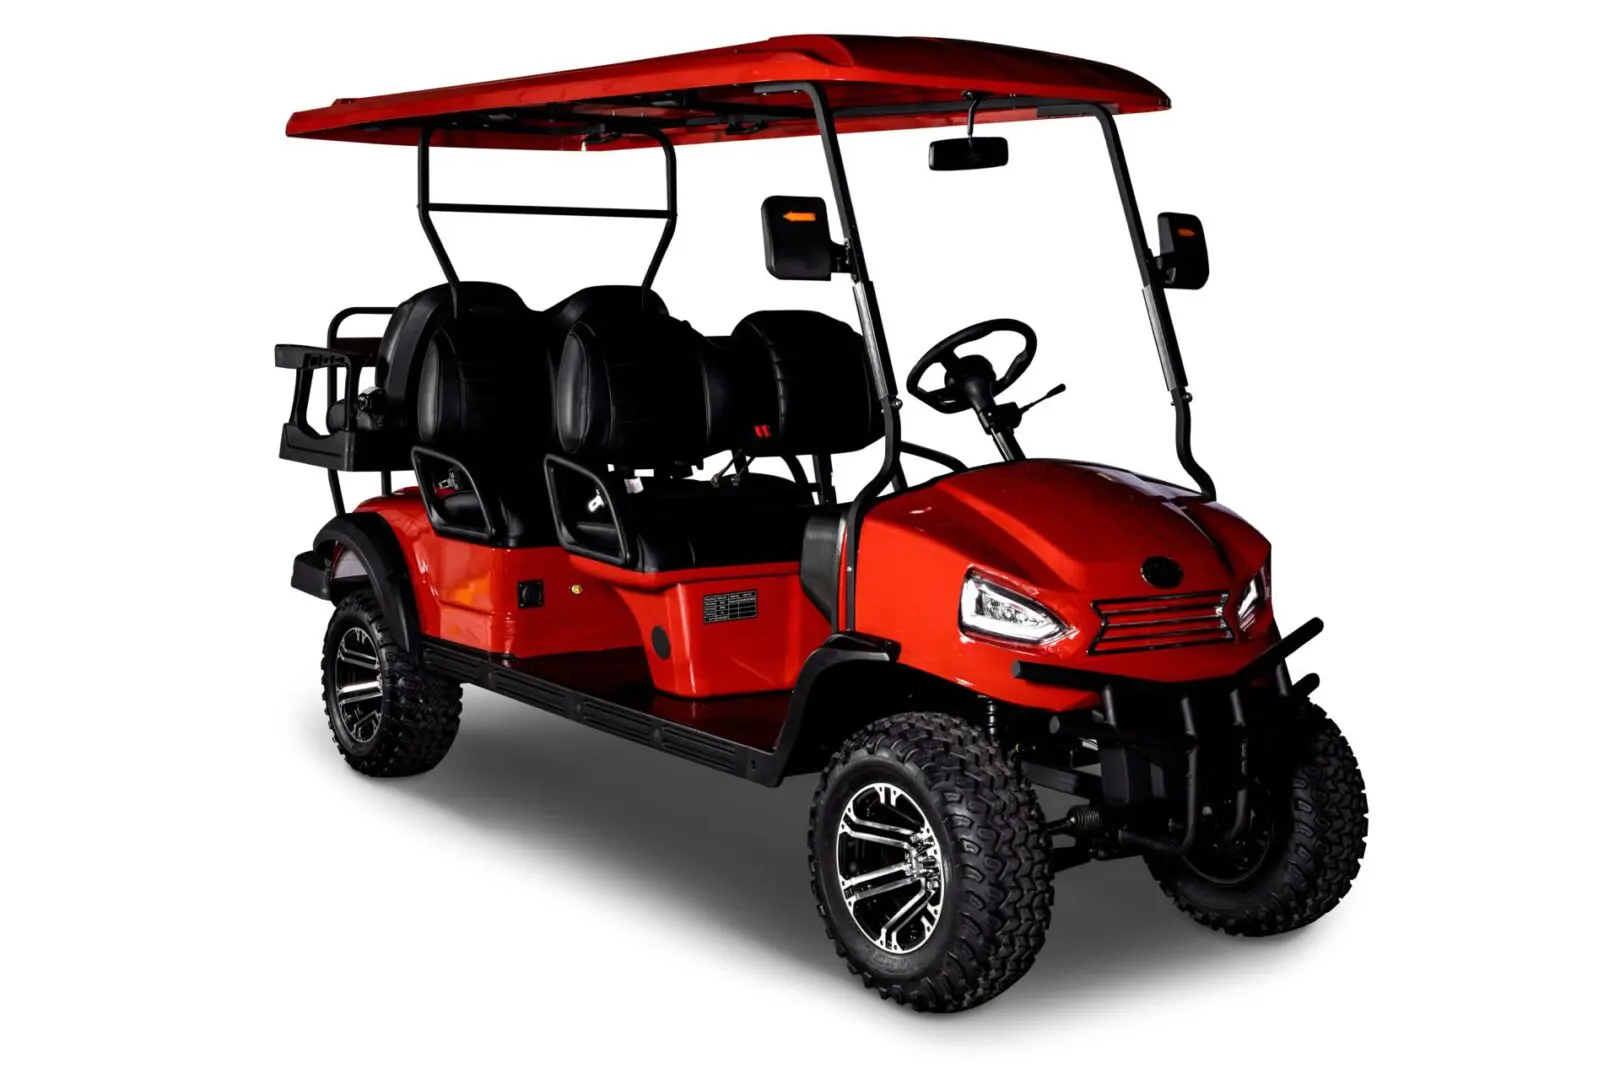 A red golf cart with six seats and a large canopy.